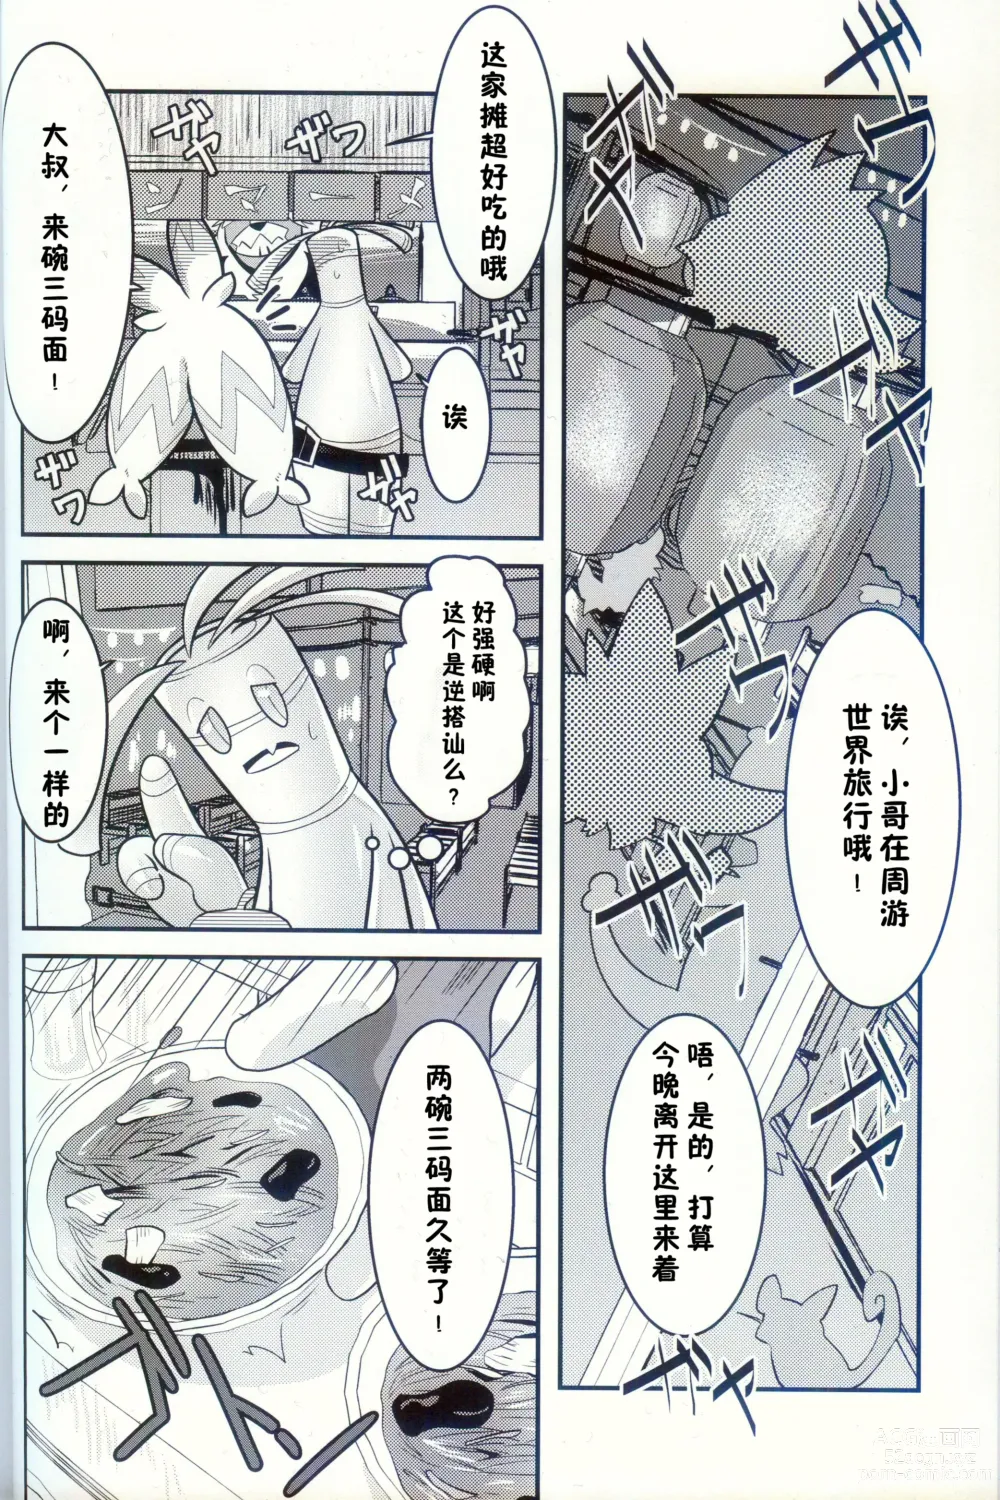 Page 5 of doujinshi 横滨的塞富豪巨锻匠